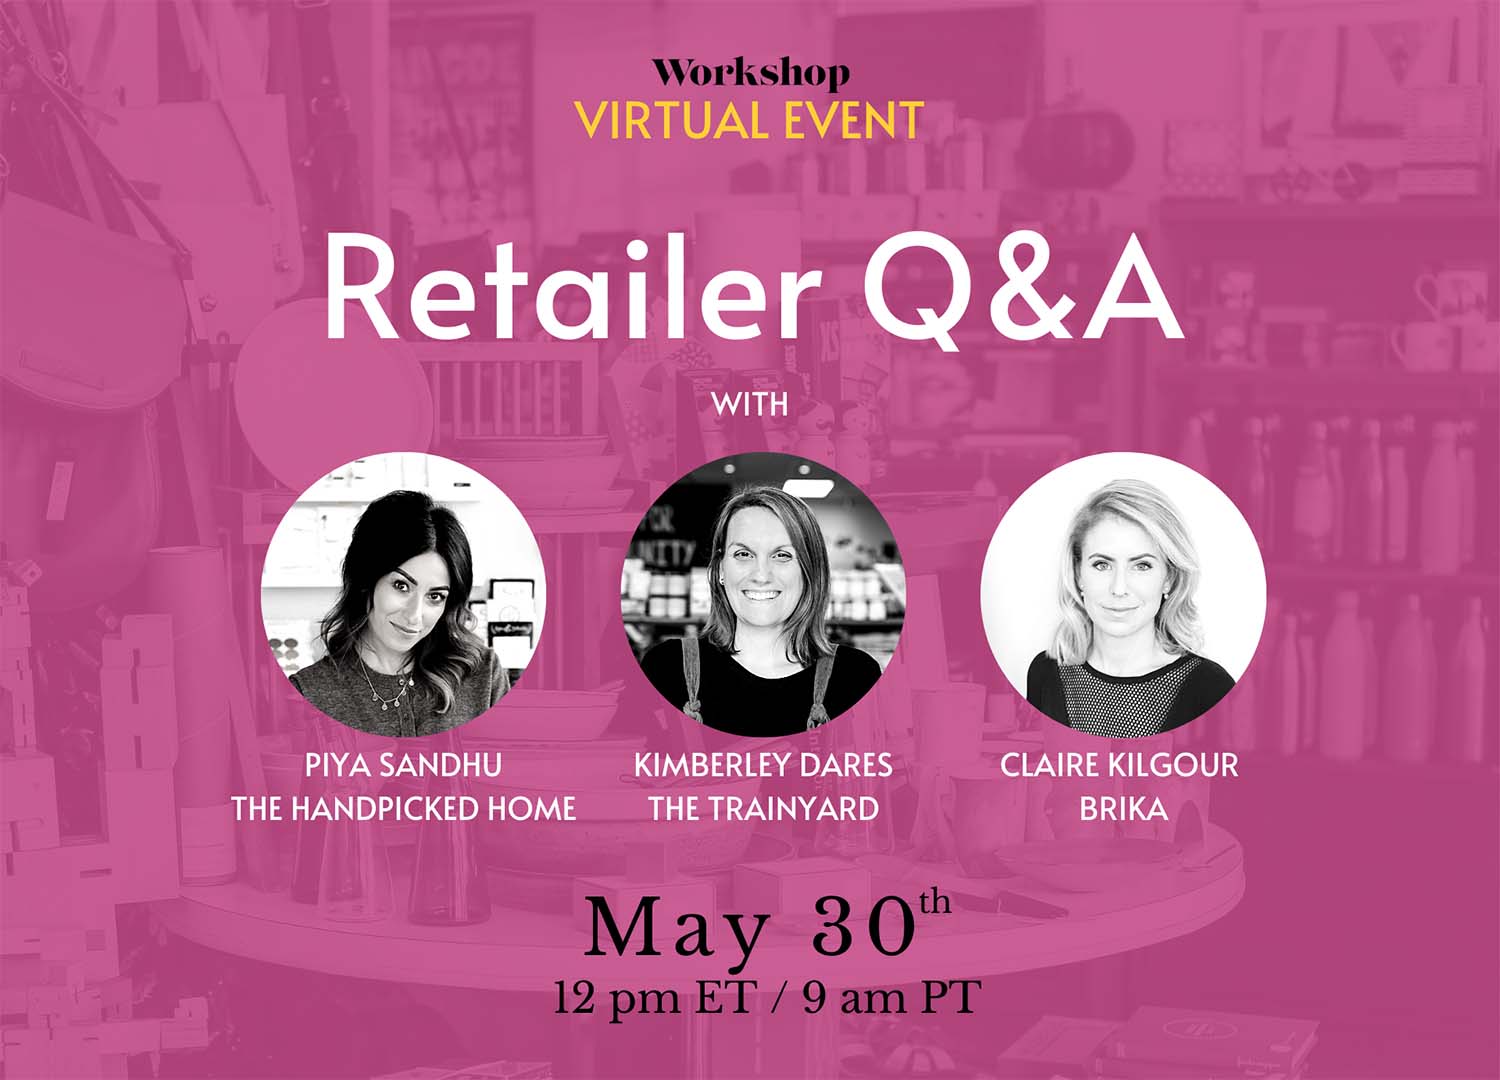 Virtual event: Retailer Q&A on May 30, 12 pm ET/9 am PT